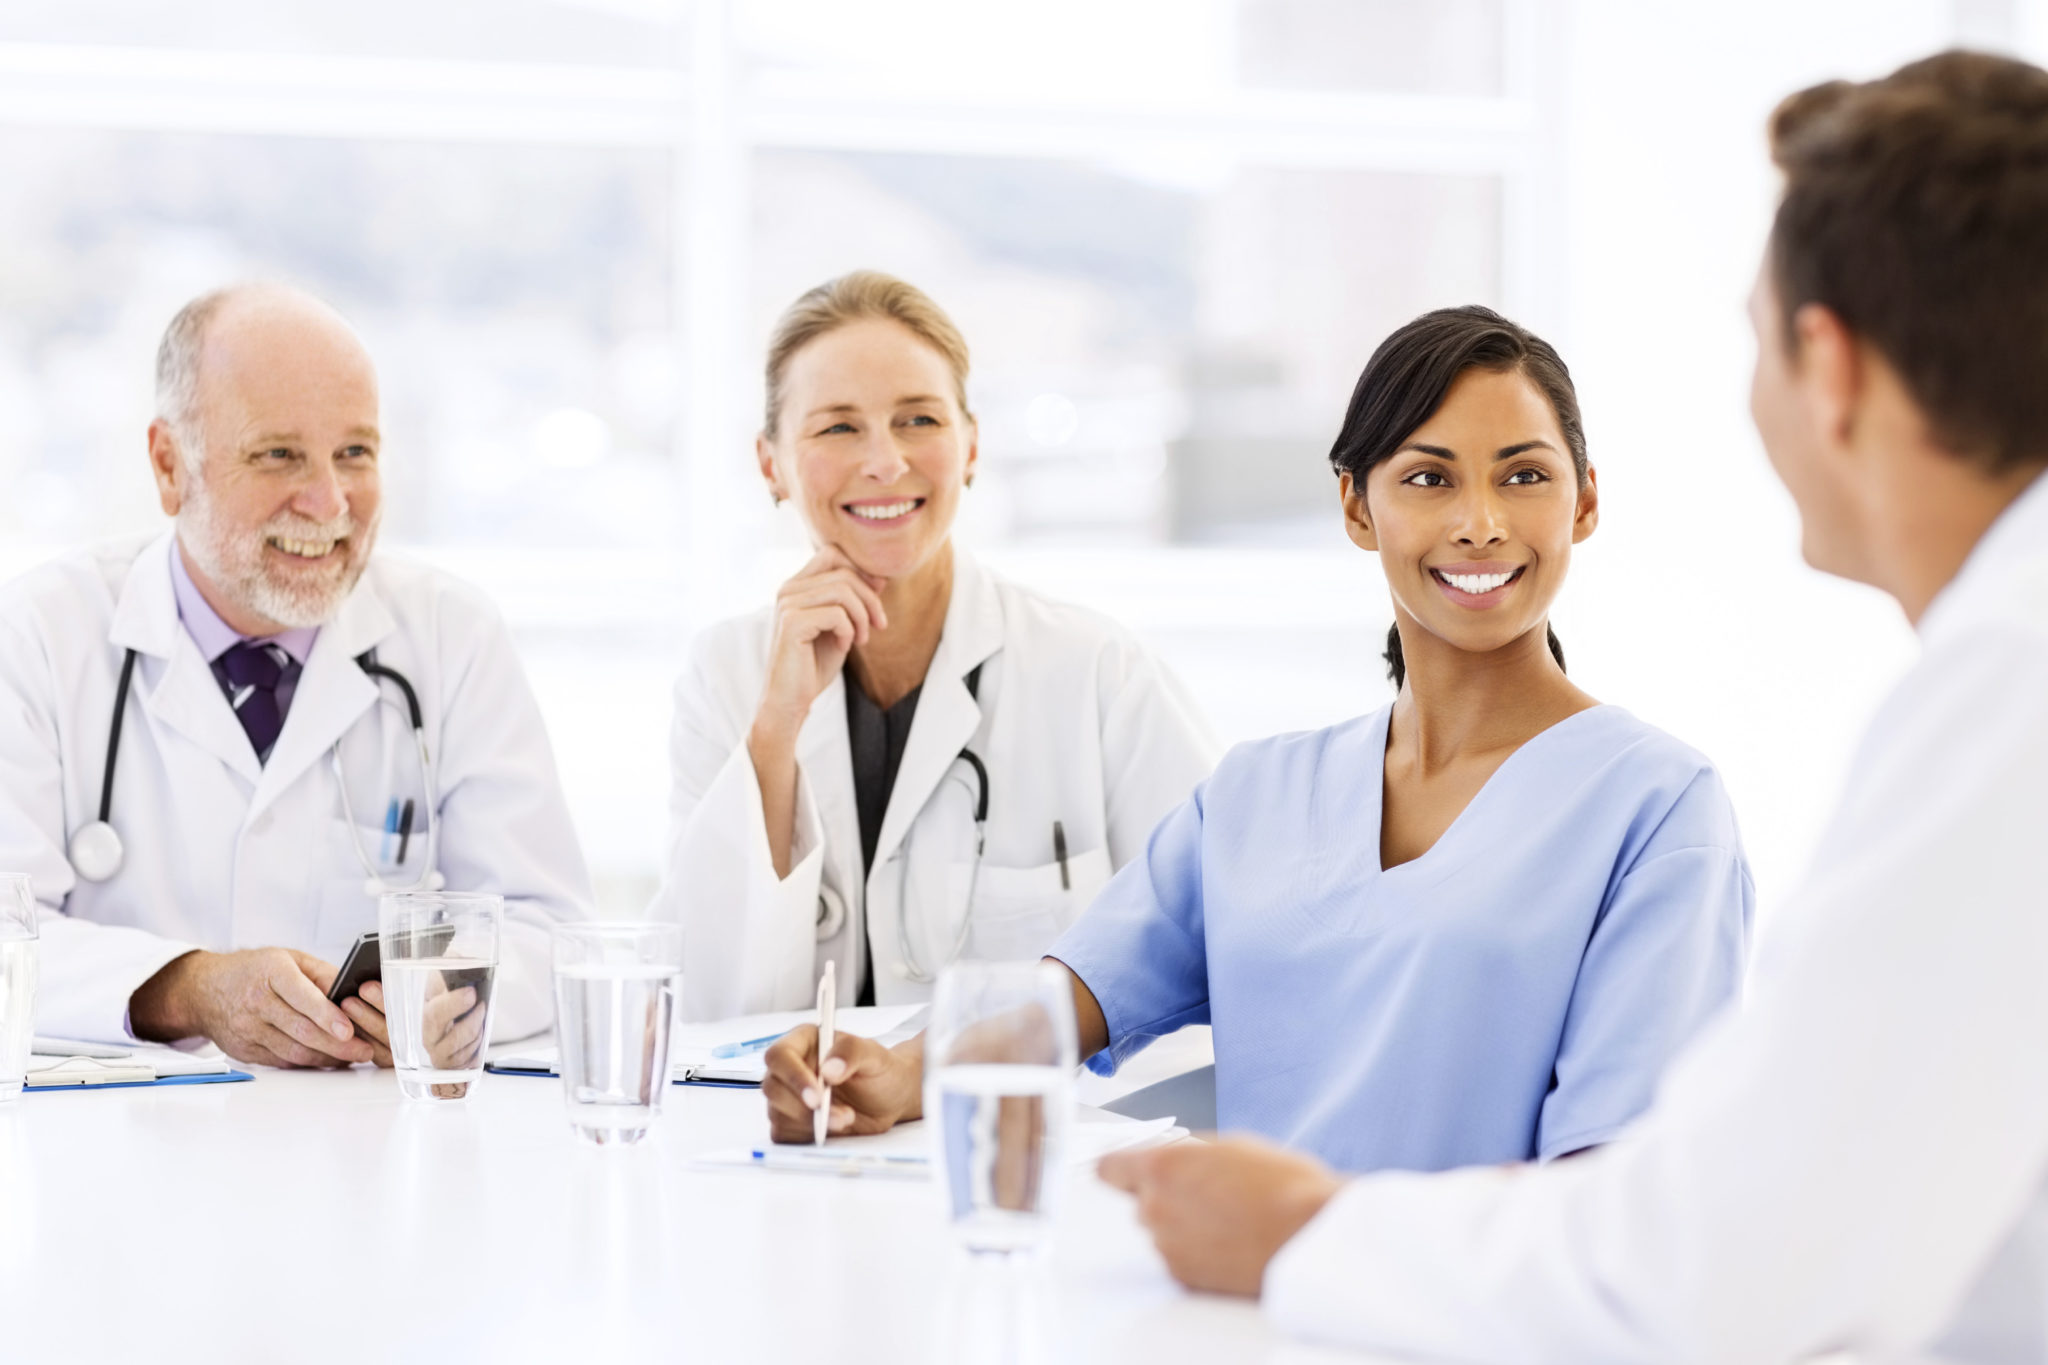 Onboarding New Physicians: The Value of a 100-Day Plan